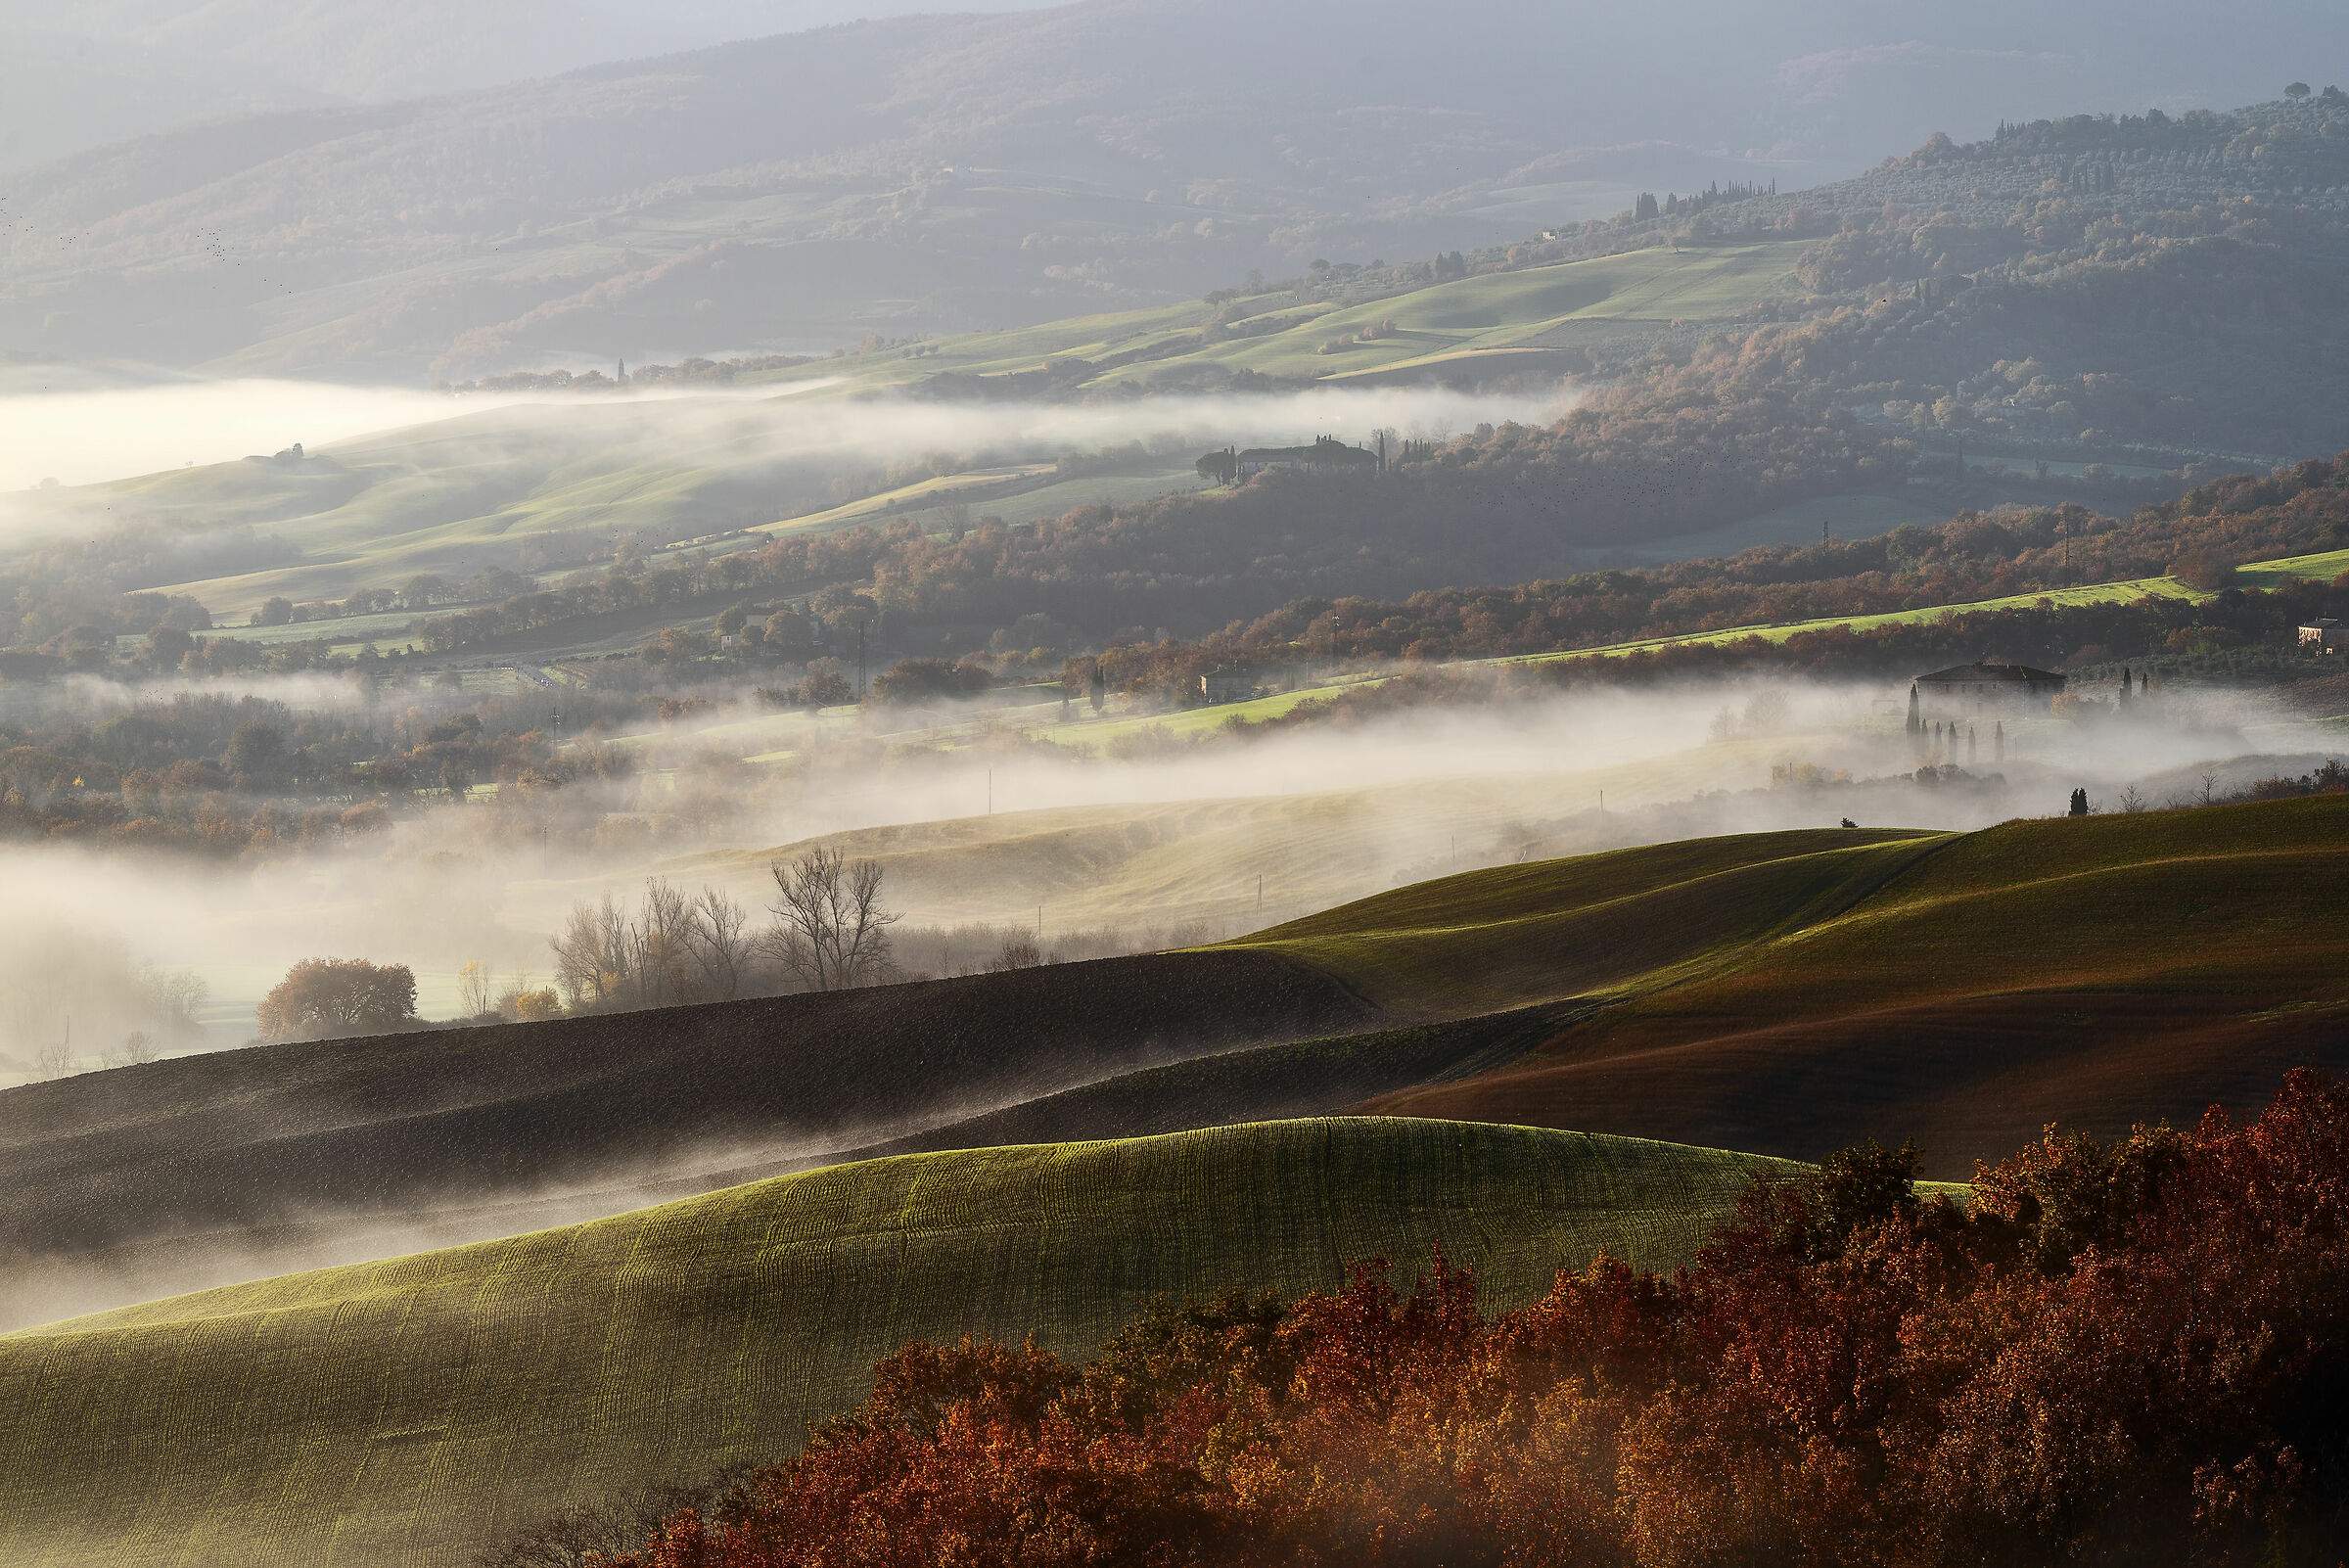 Tuscany campaign in Autumn...